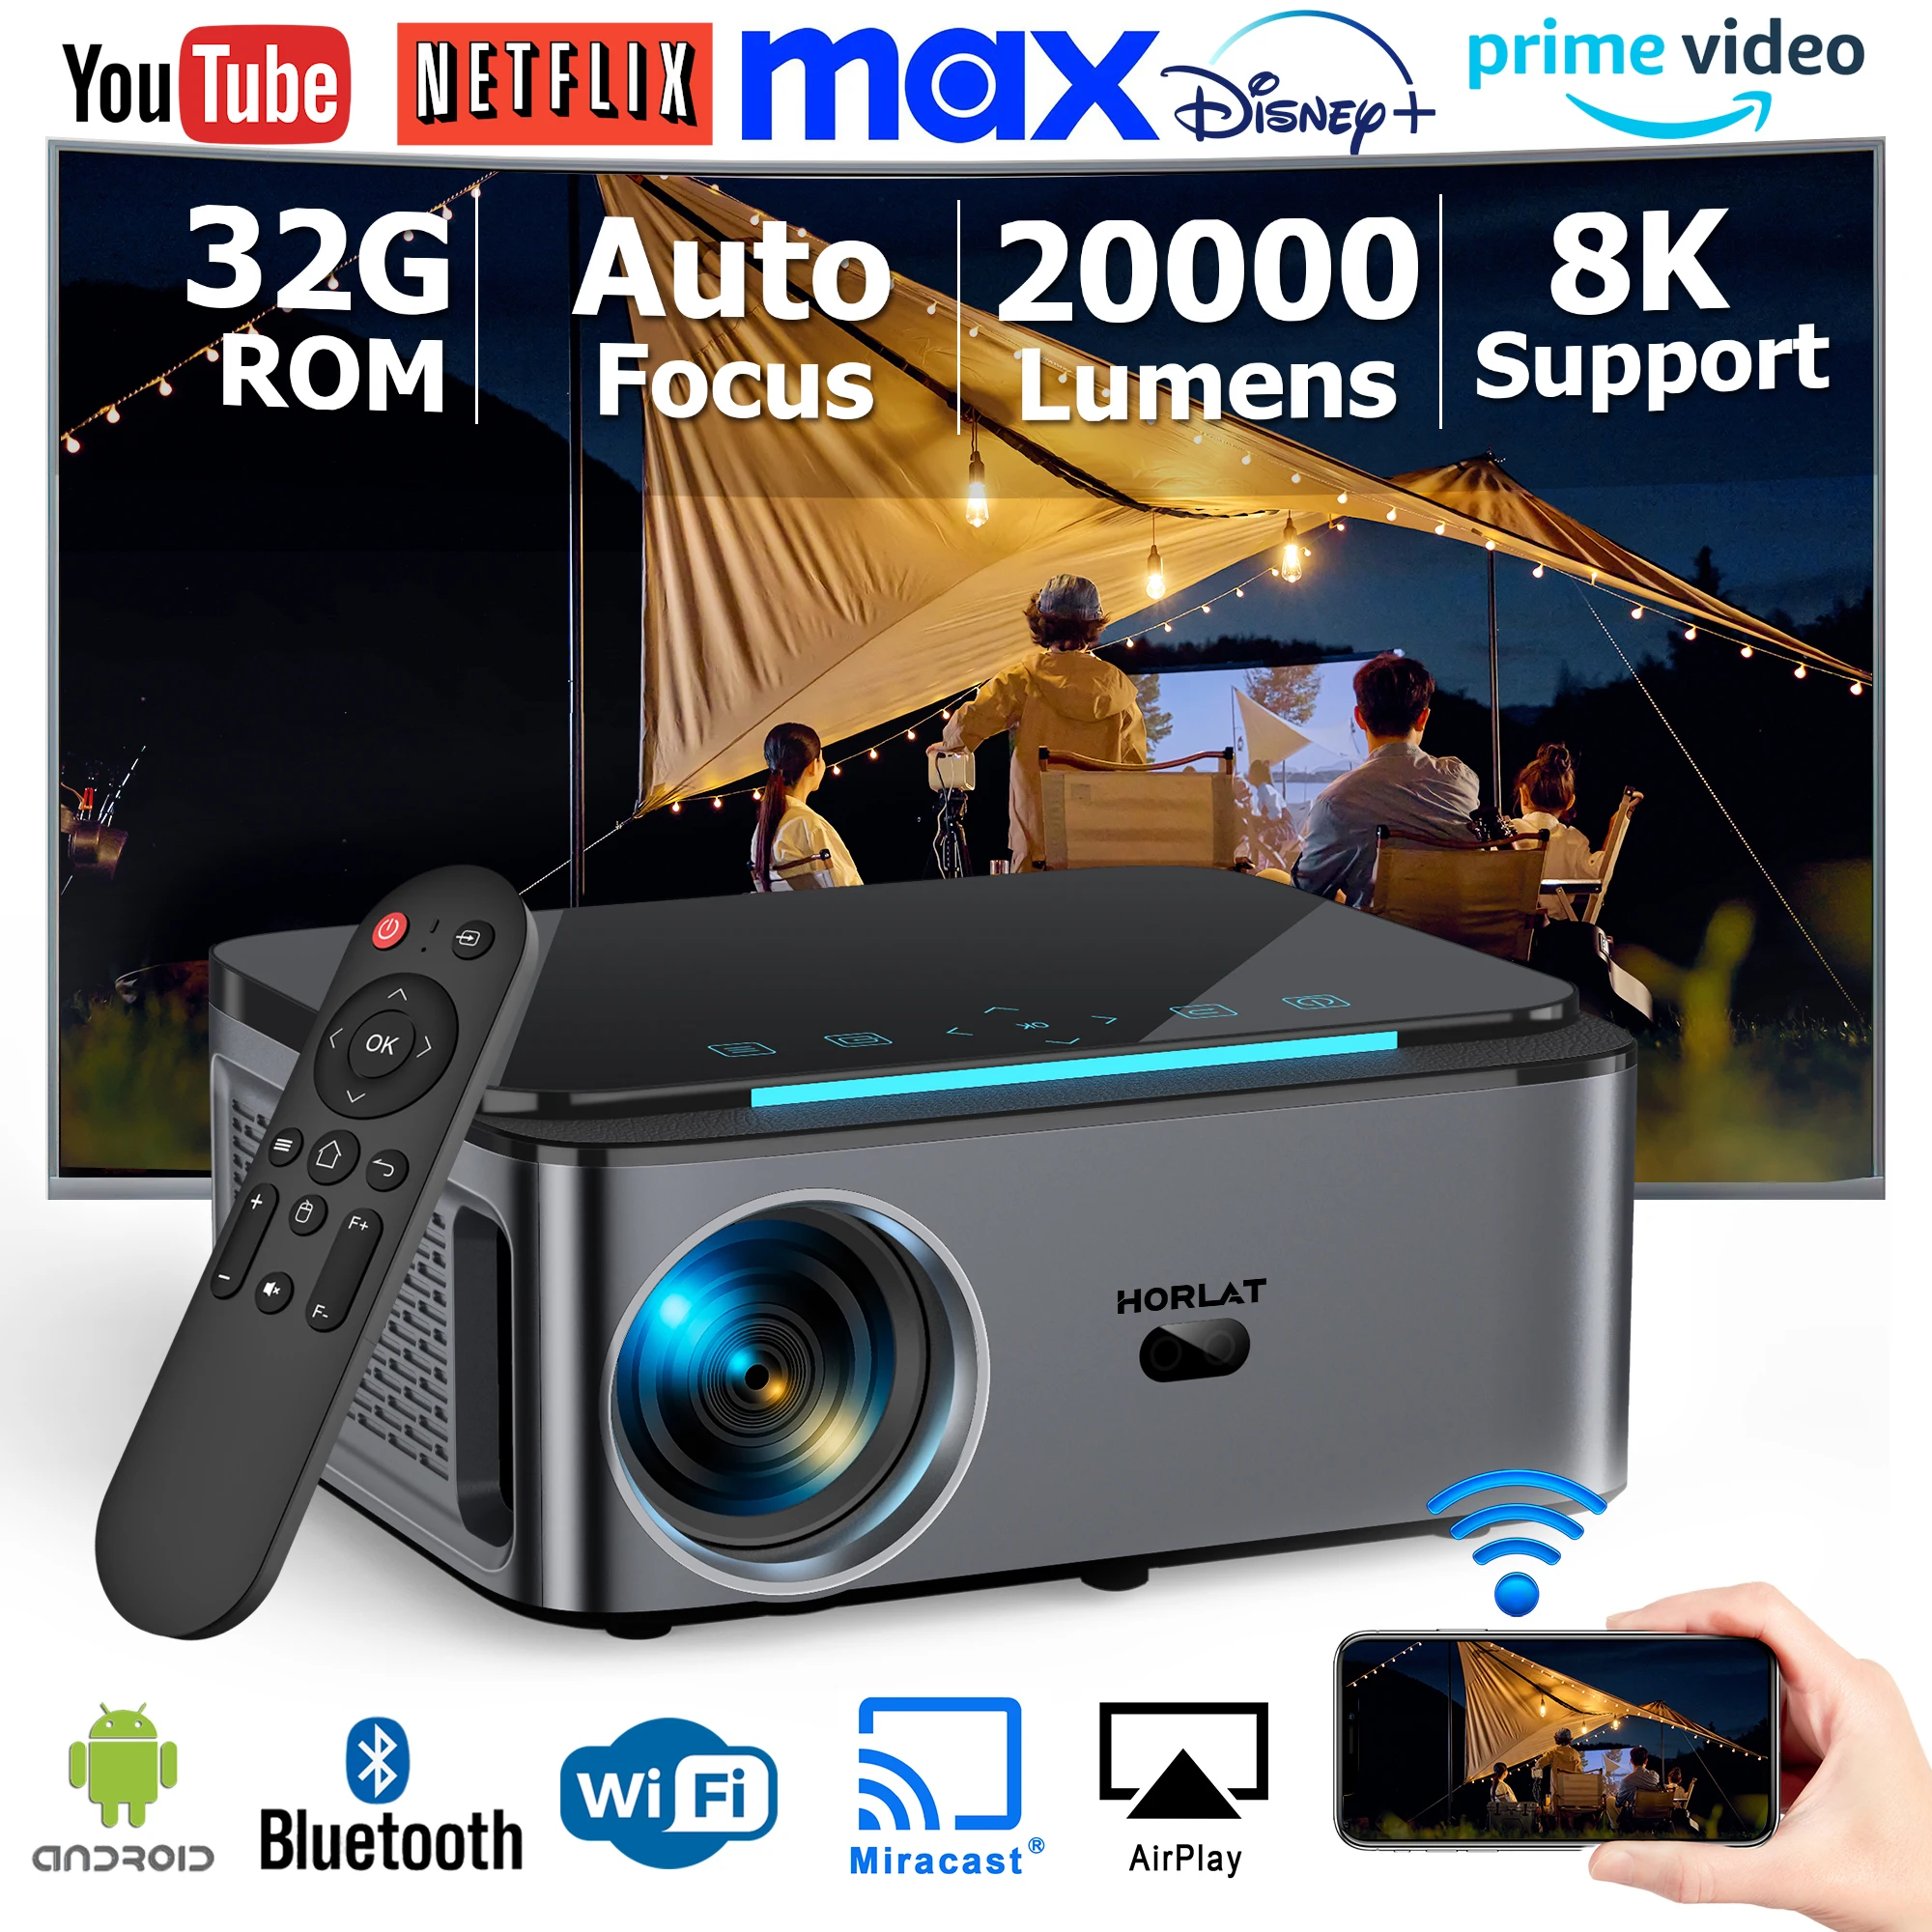 

HORLAT 20000Lumens Android Beamer Projector Full HD 1080P 4K Video Auto Focus& Keystone Home Theater 5G WiFi Portable Proyector